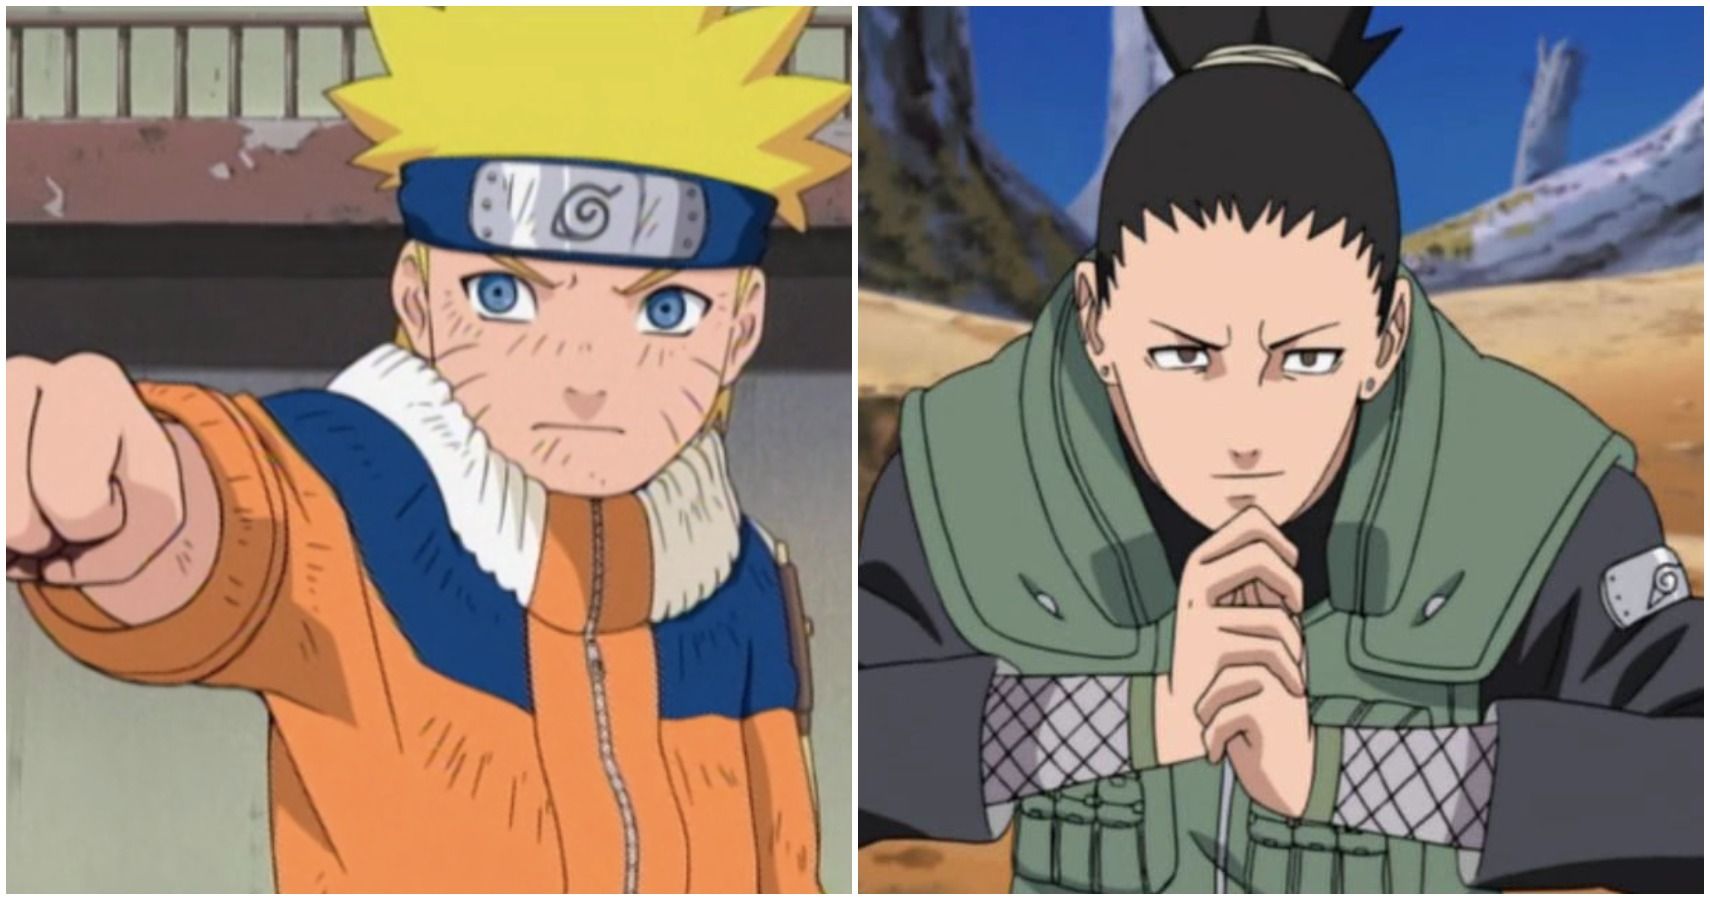 The 15 Strongest Clans In The Naruto Franchise, Ranked